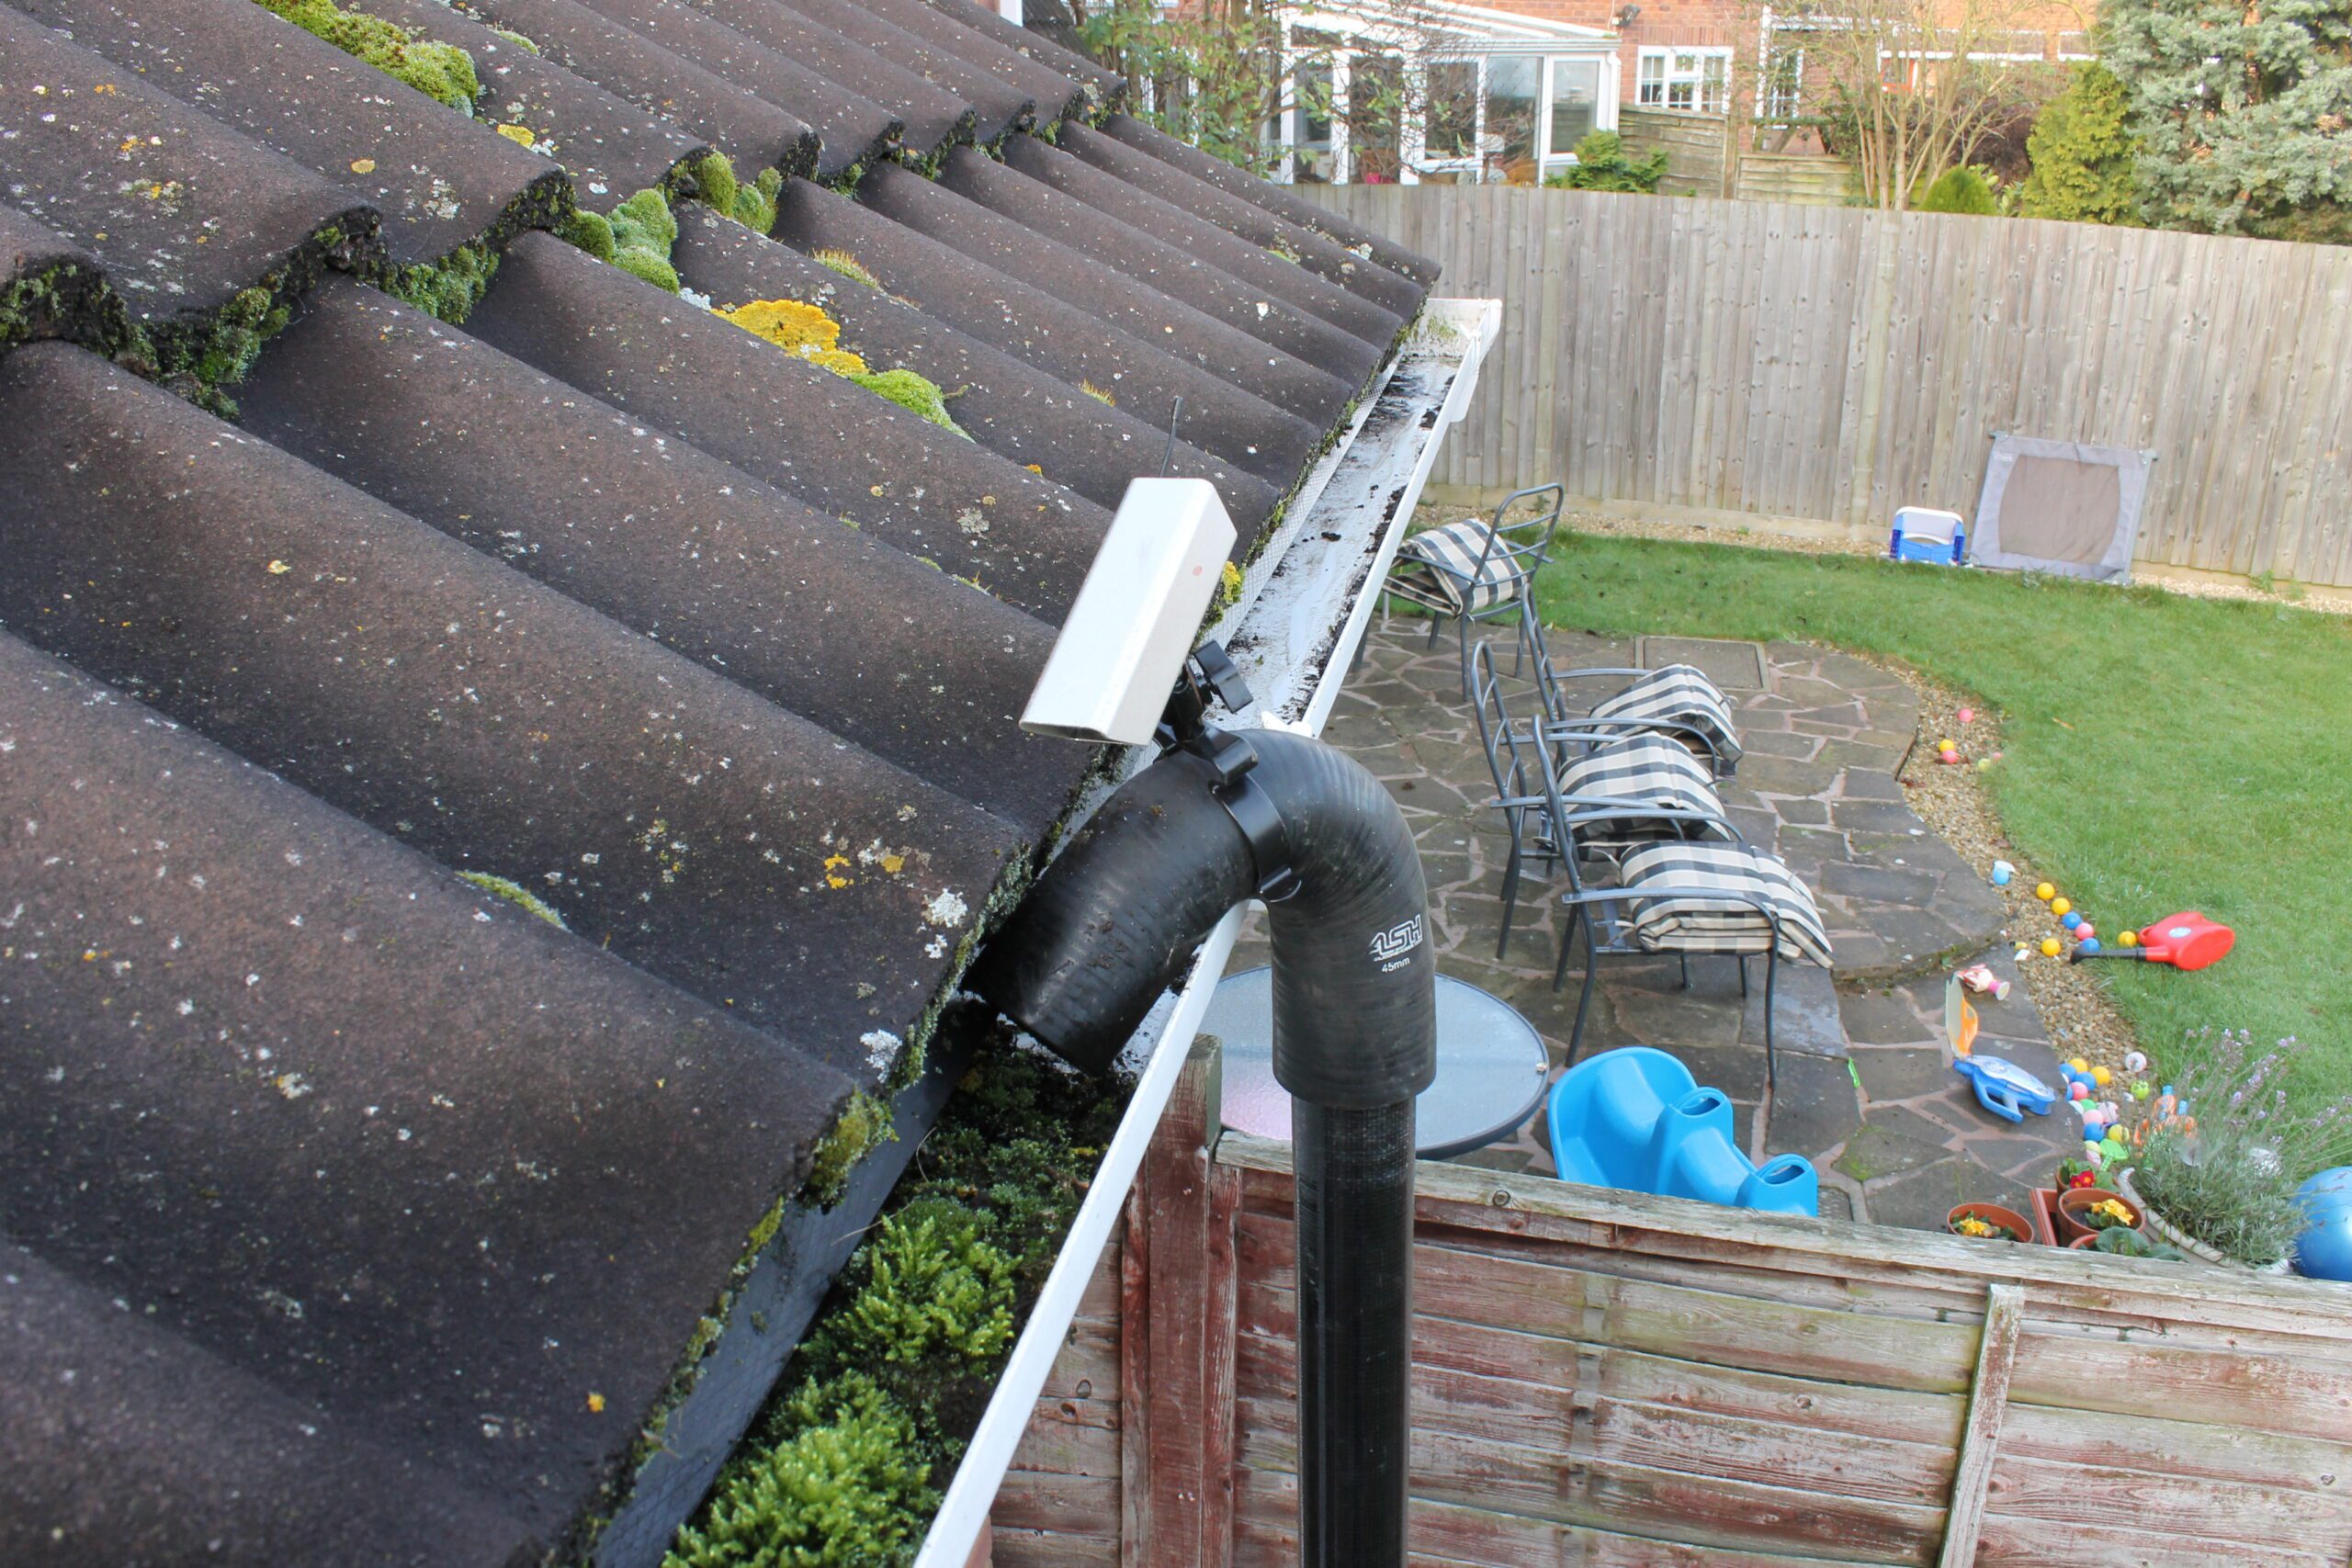 Gutter Cleaning Services in Essex